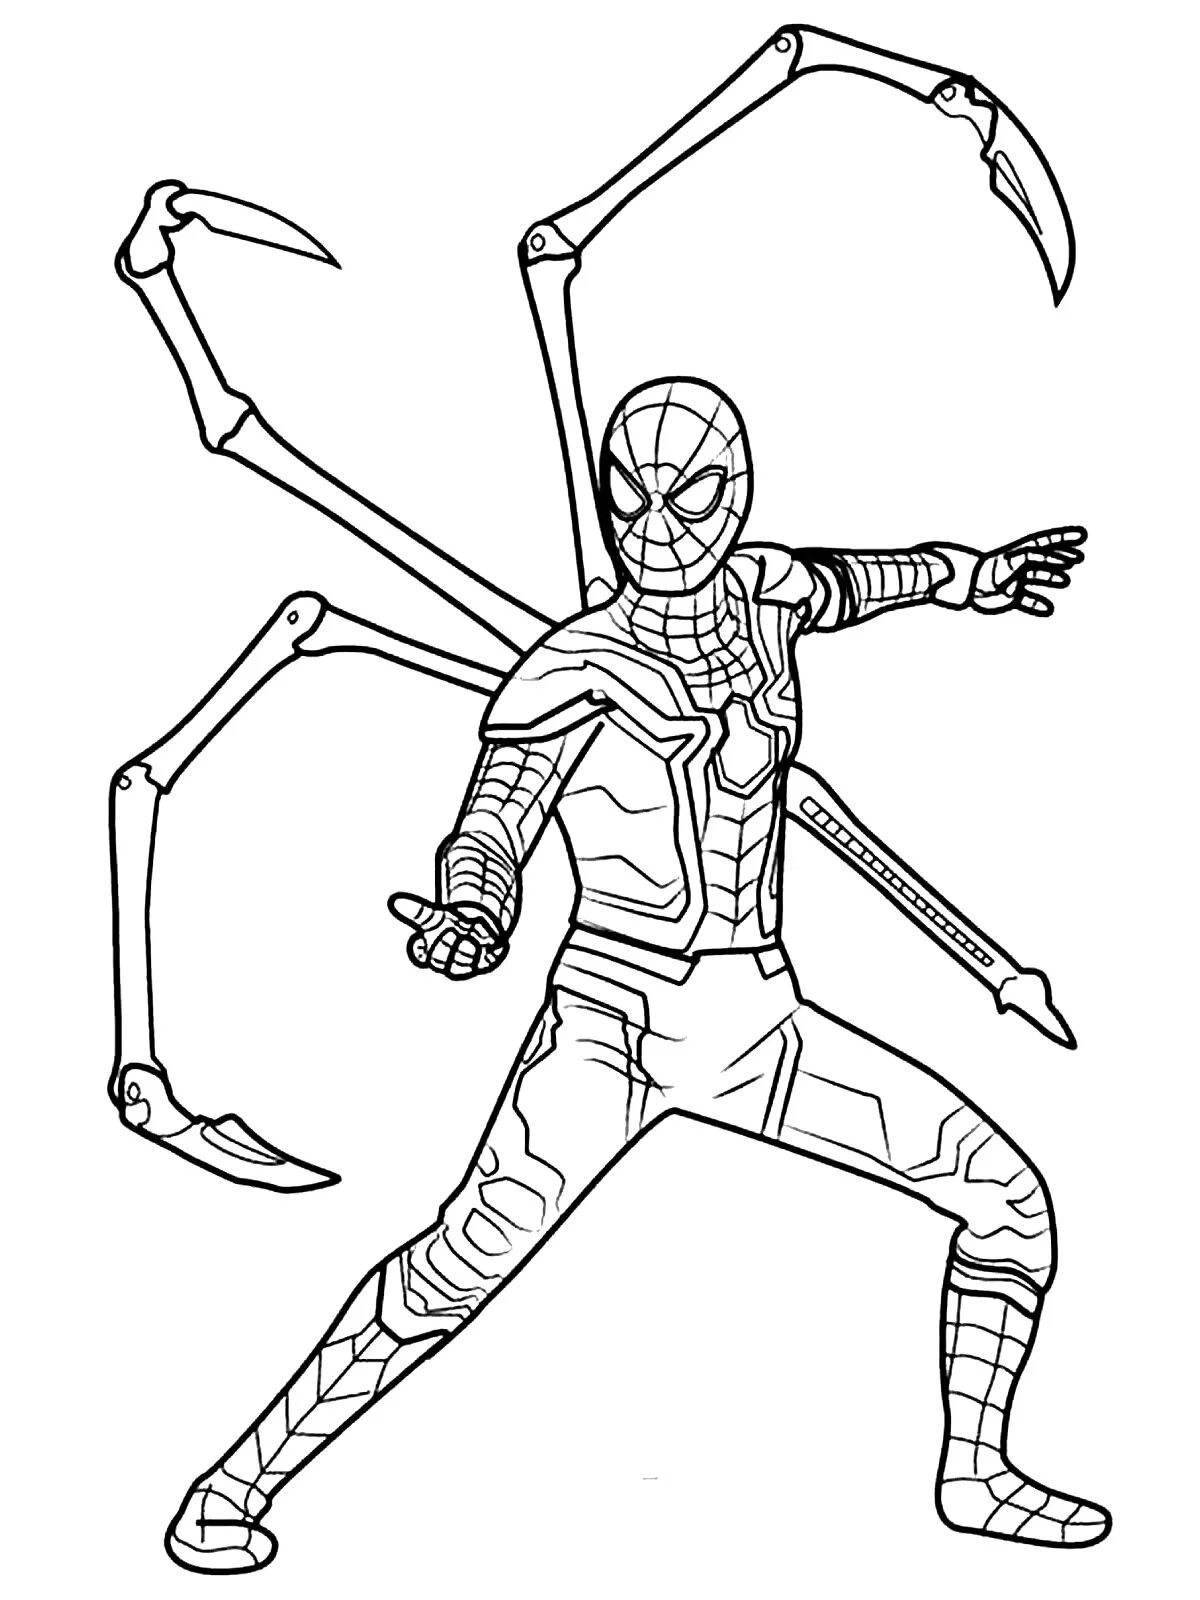 Funny Spiderman and Iron Man coloring pages for kids